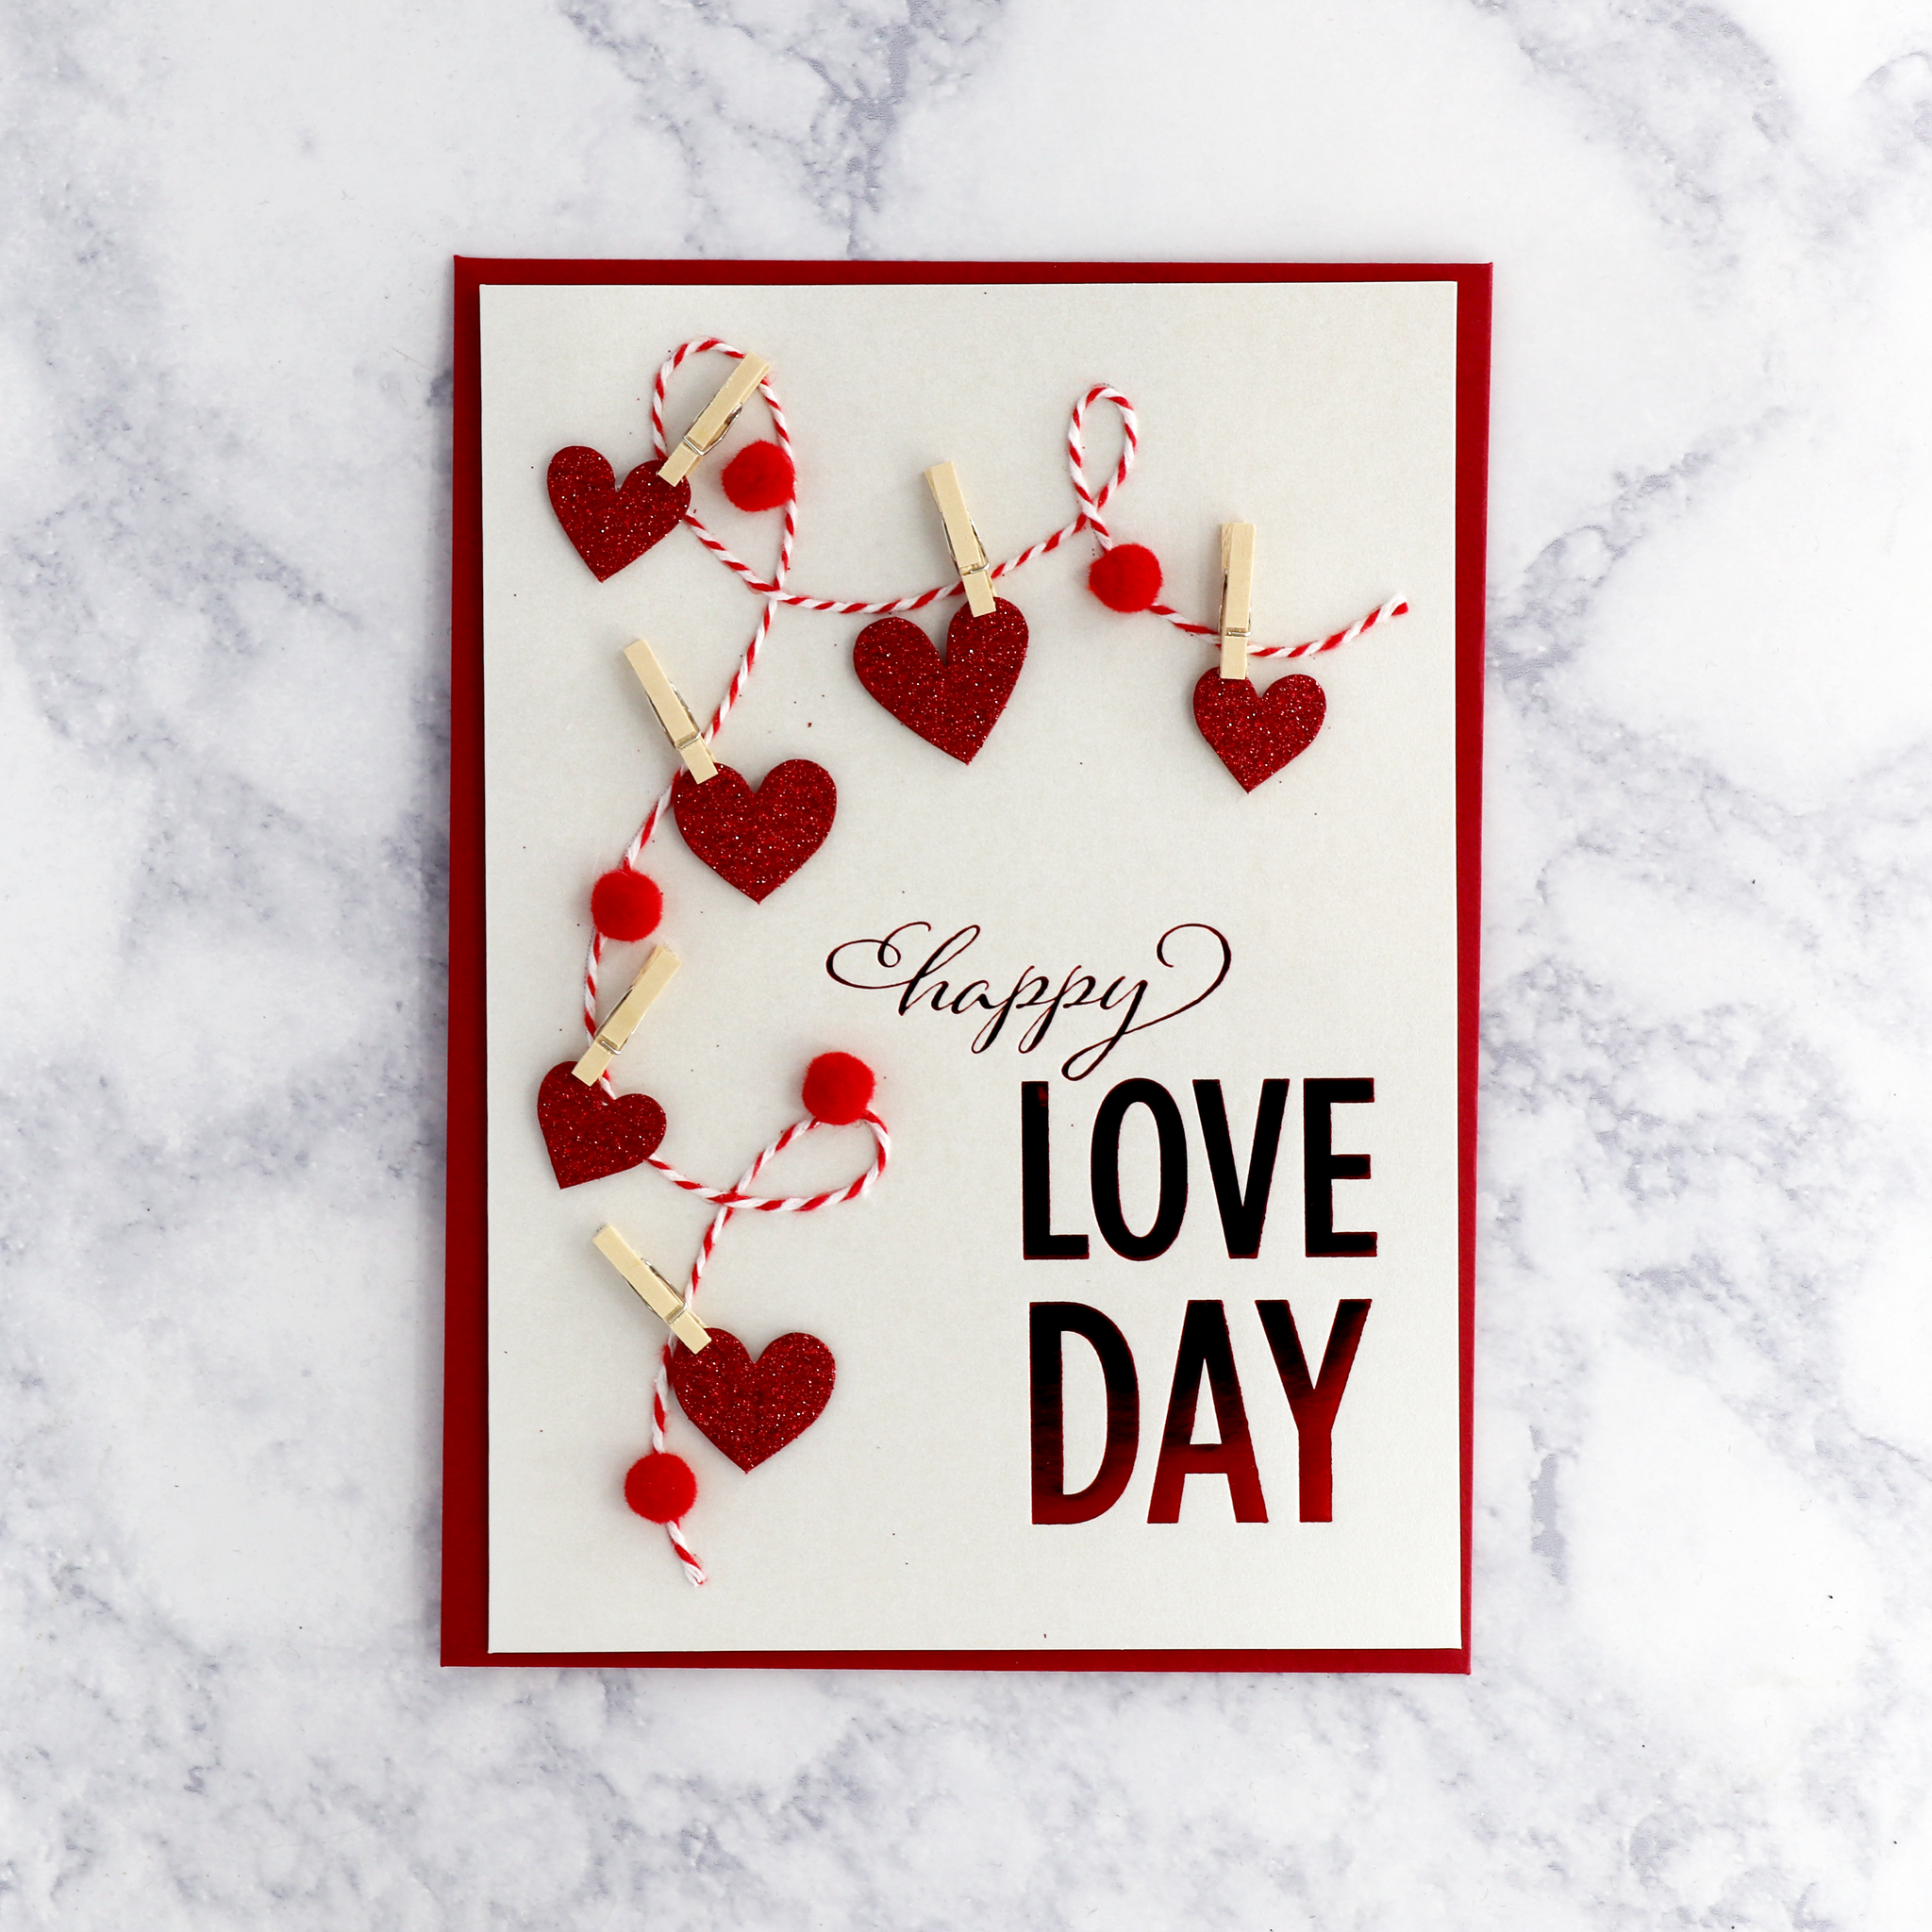 Hearts On Line "Love Day" Valentine’s Day Card